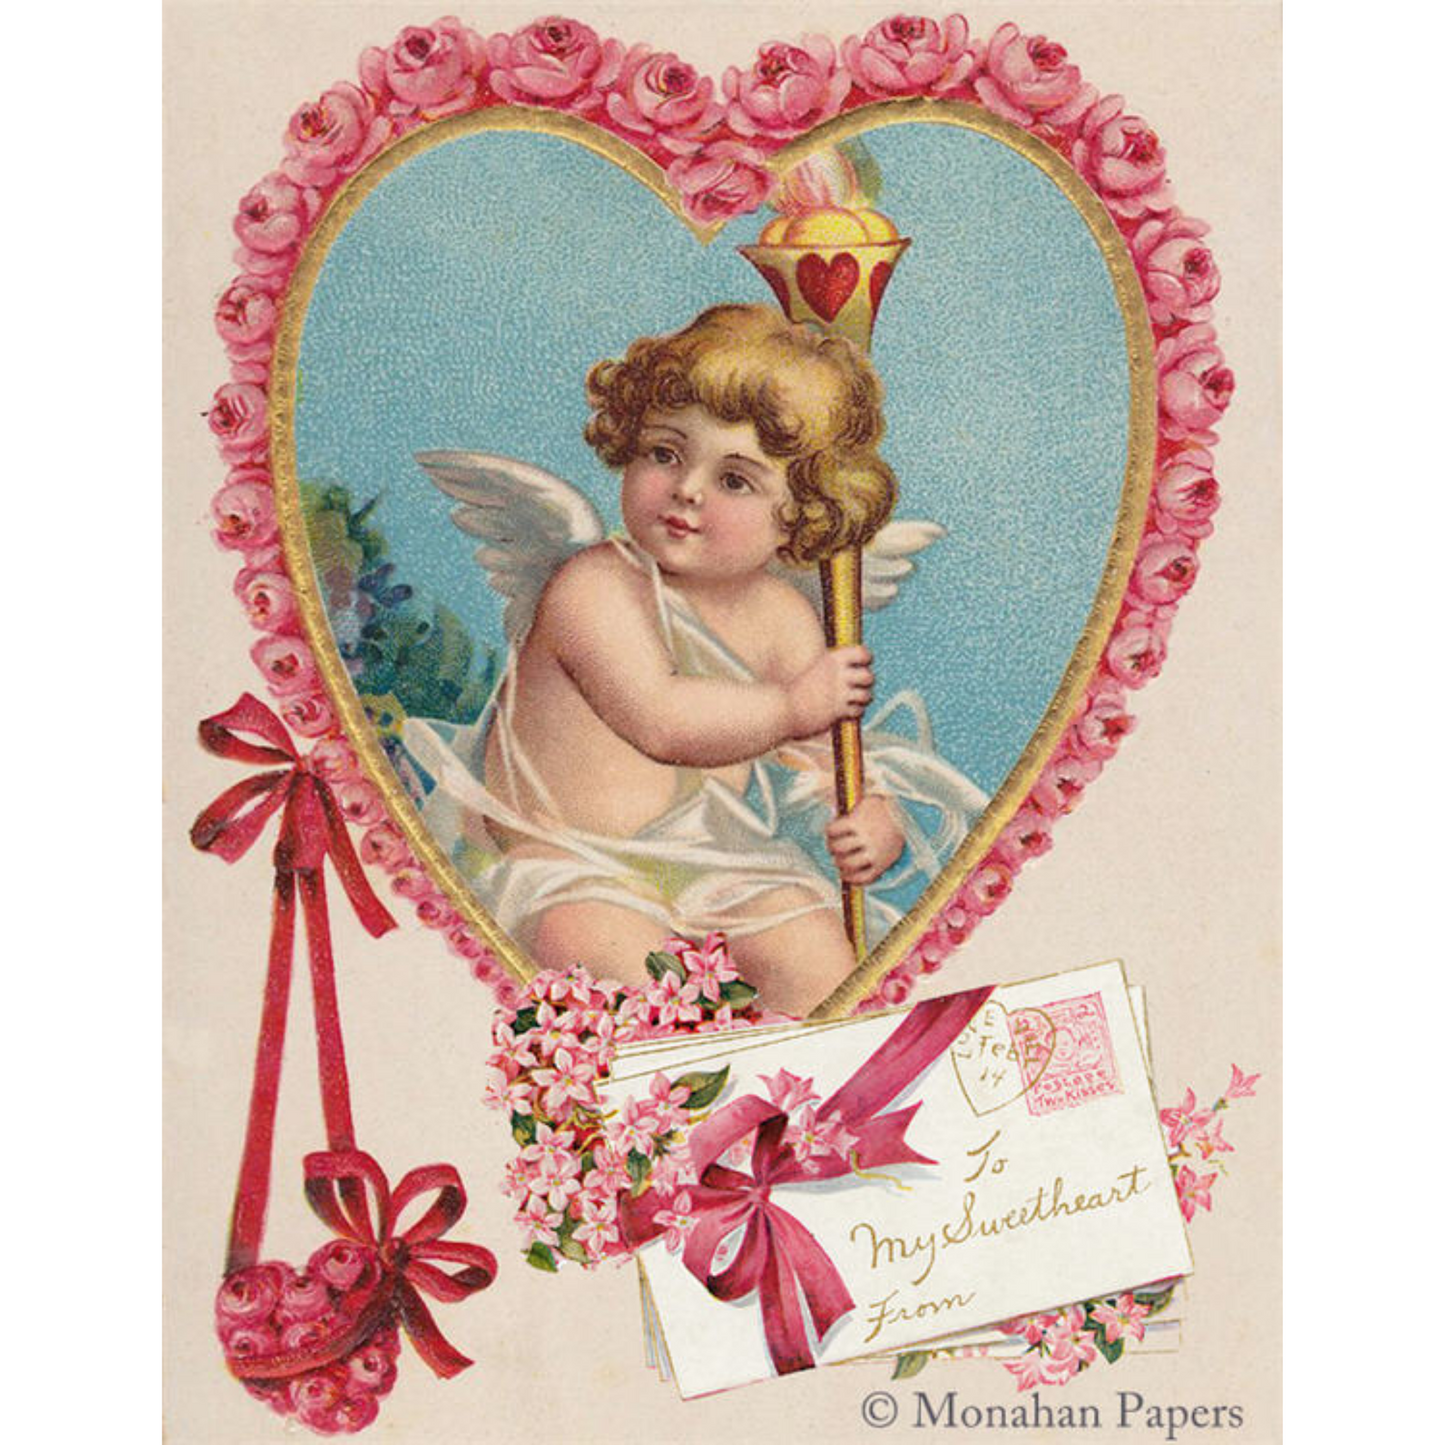 To My Sweetheart 11" x 17" Valentine's Day motif decoupage paper by Monahan Papers available at Milton's Daughter. Cupid holding torch framed by heart.